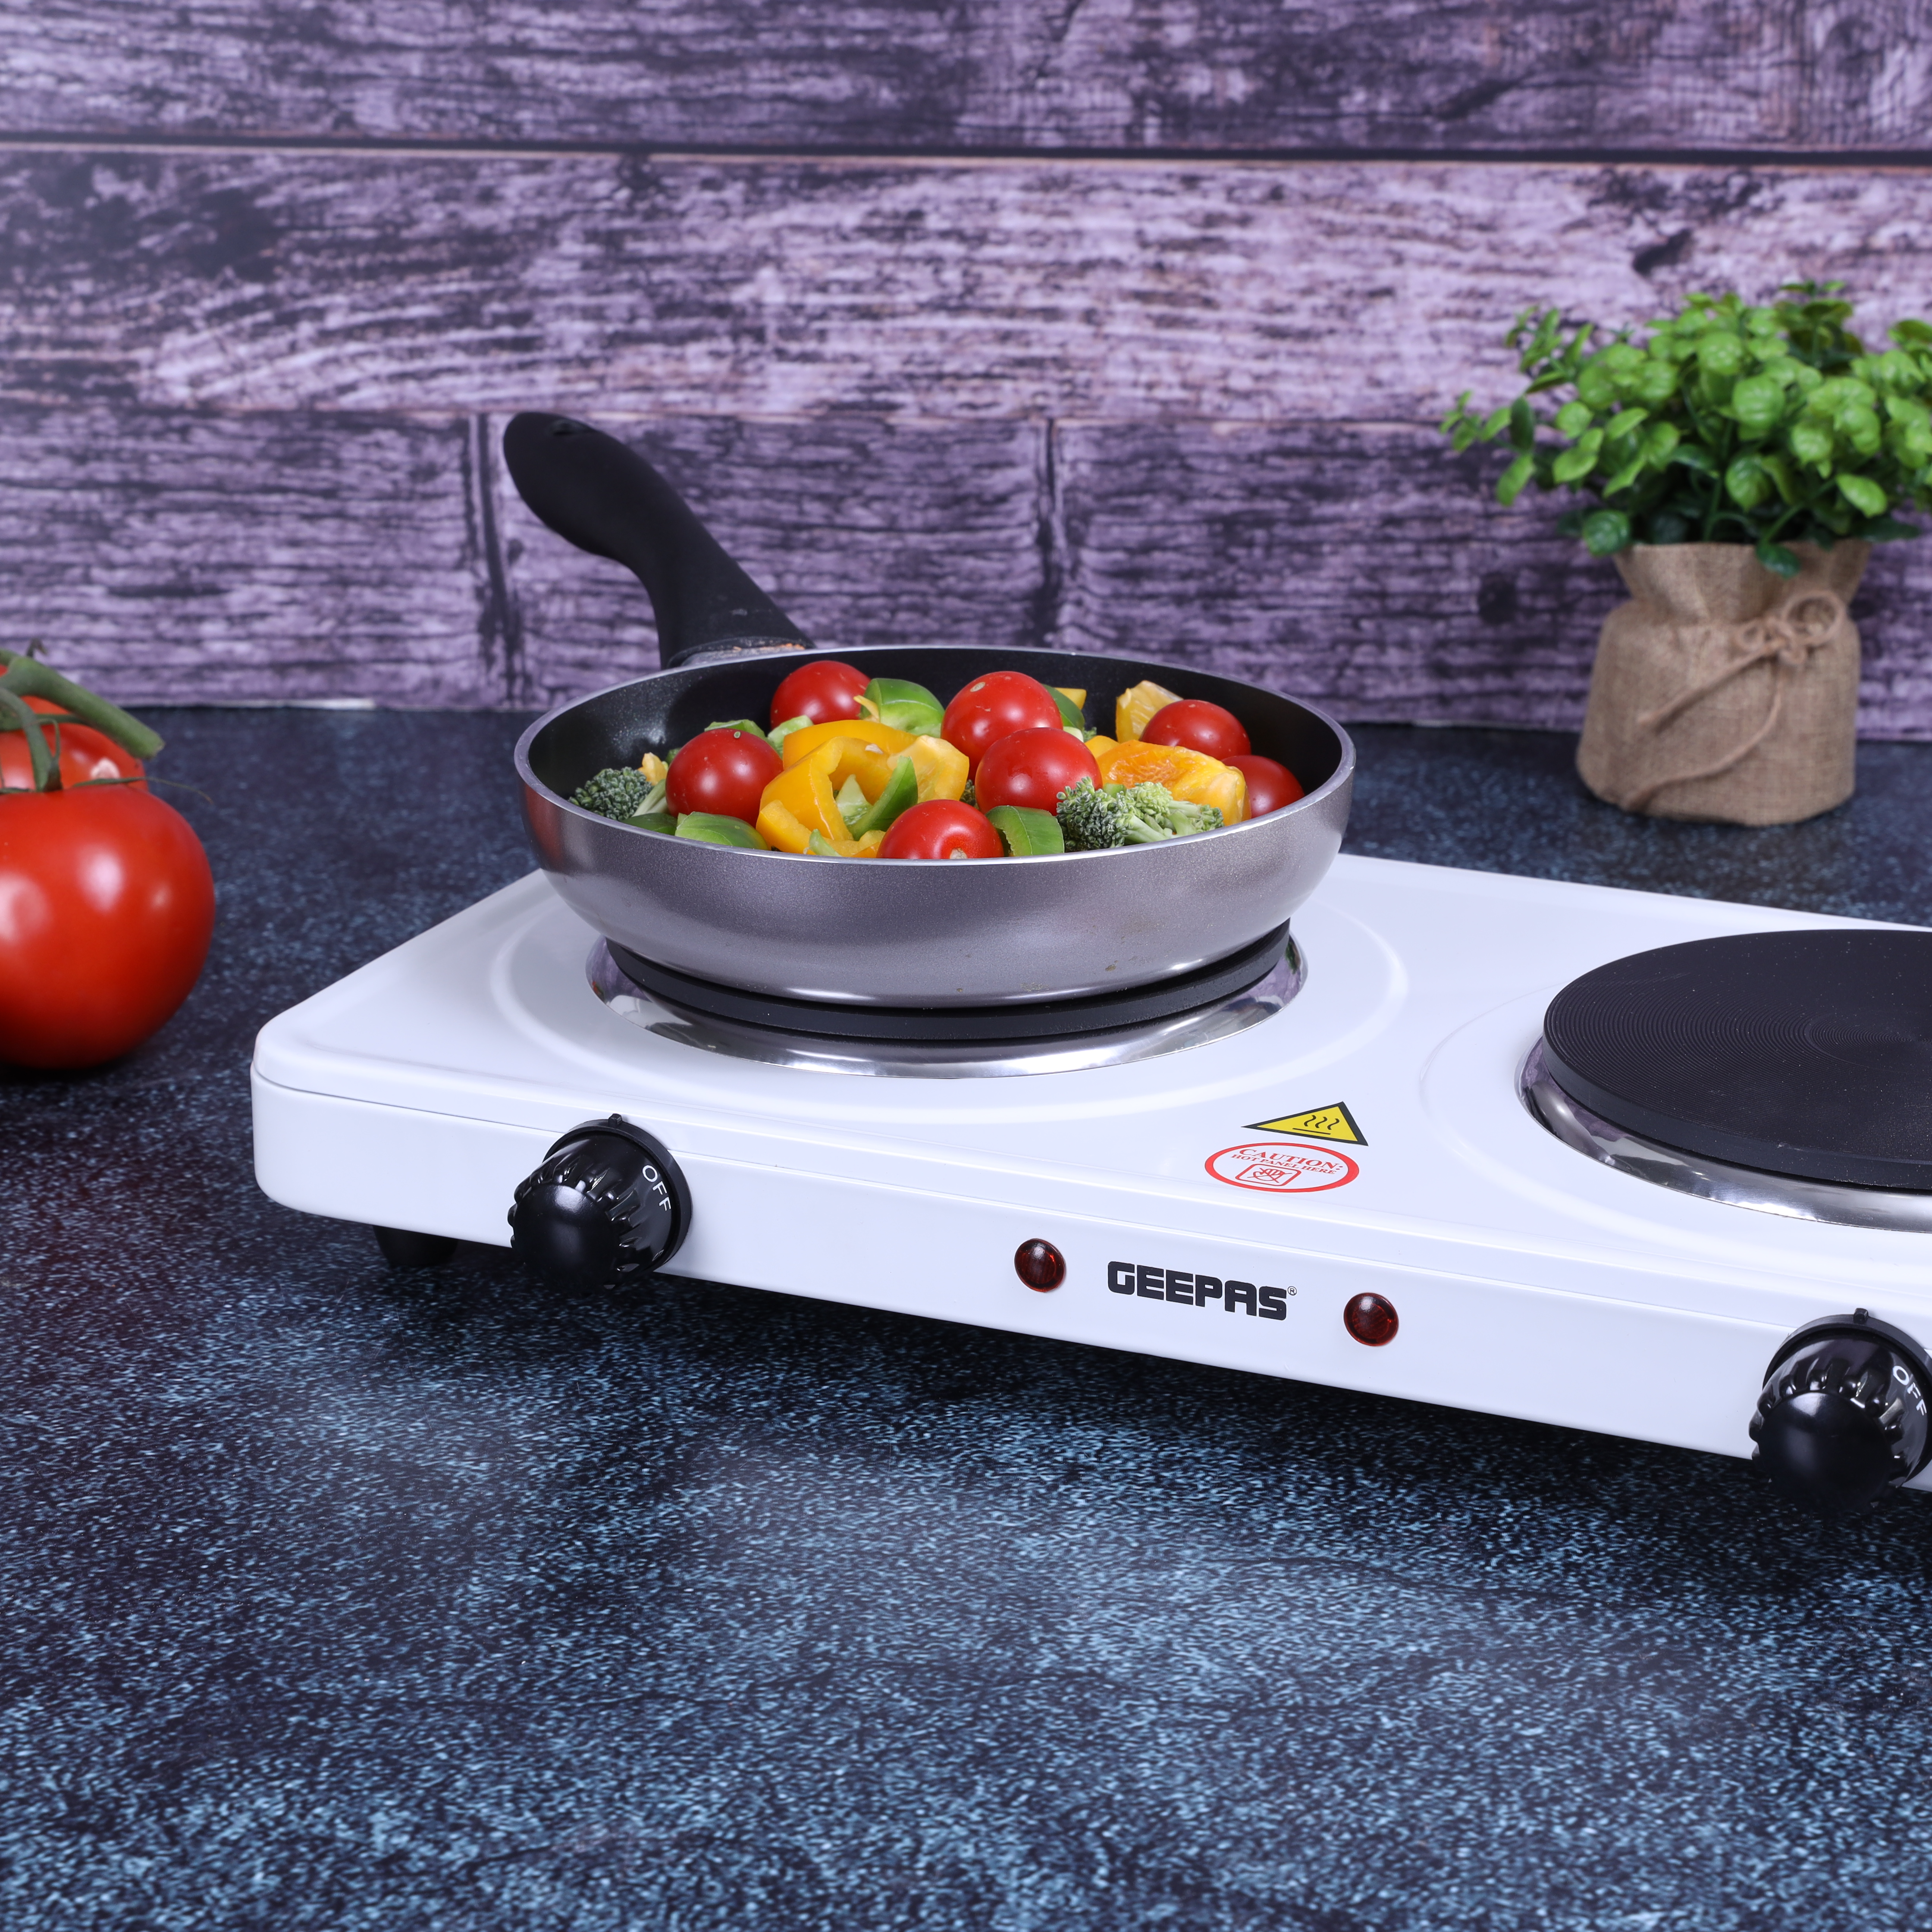 Geepas GHP32014 2000W Dual Hot Plate - Cast Iron Heating Plate 155mm -  Portable Electric Hob with Temperature Control for Home, Camping & Caravan  Cooking